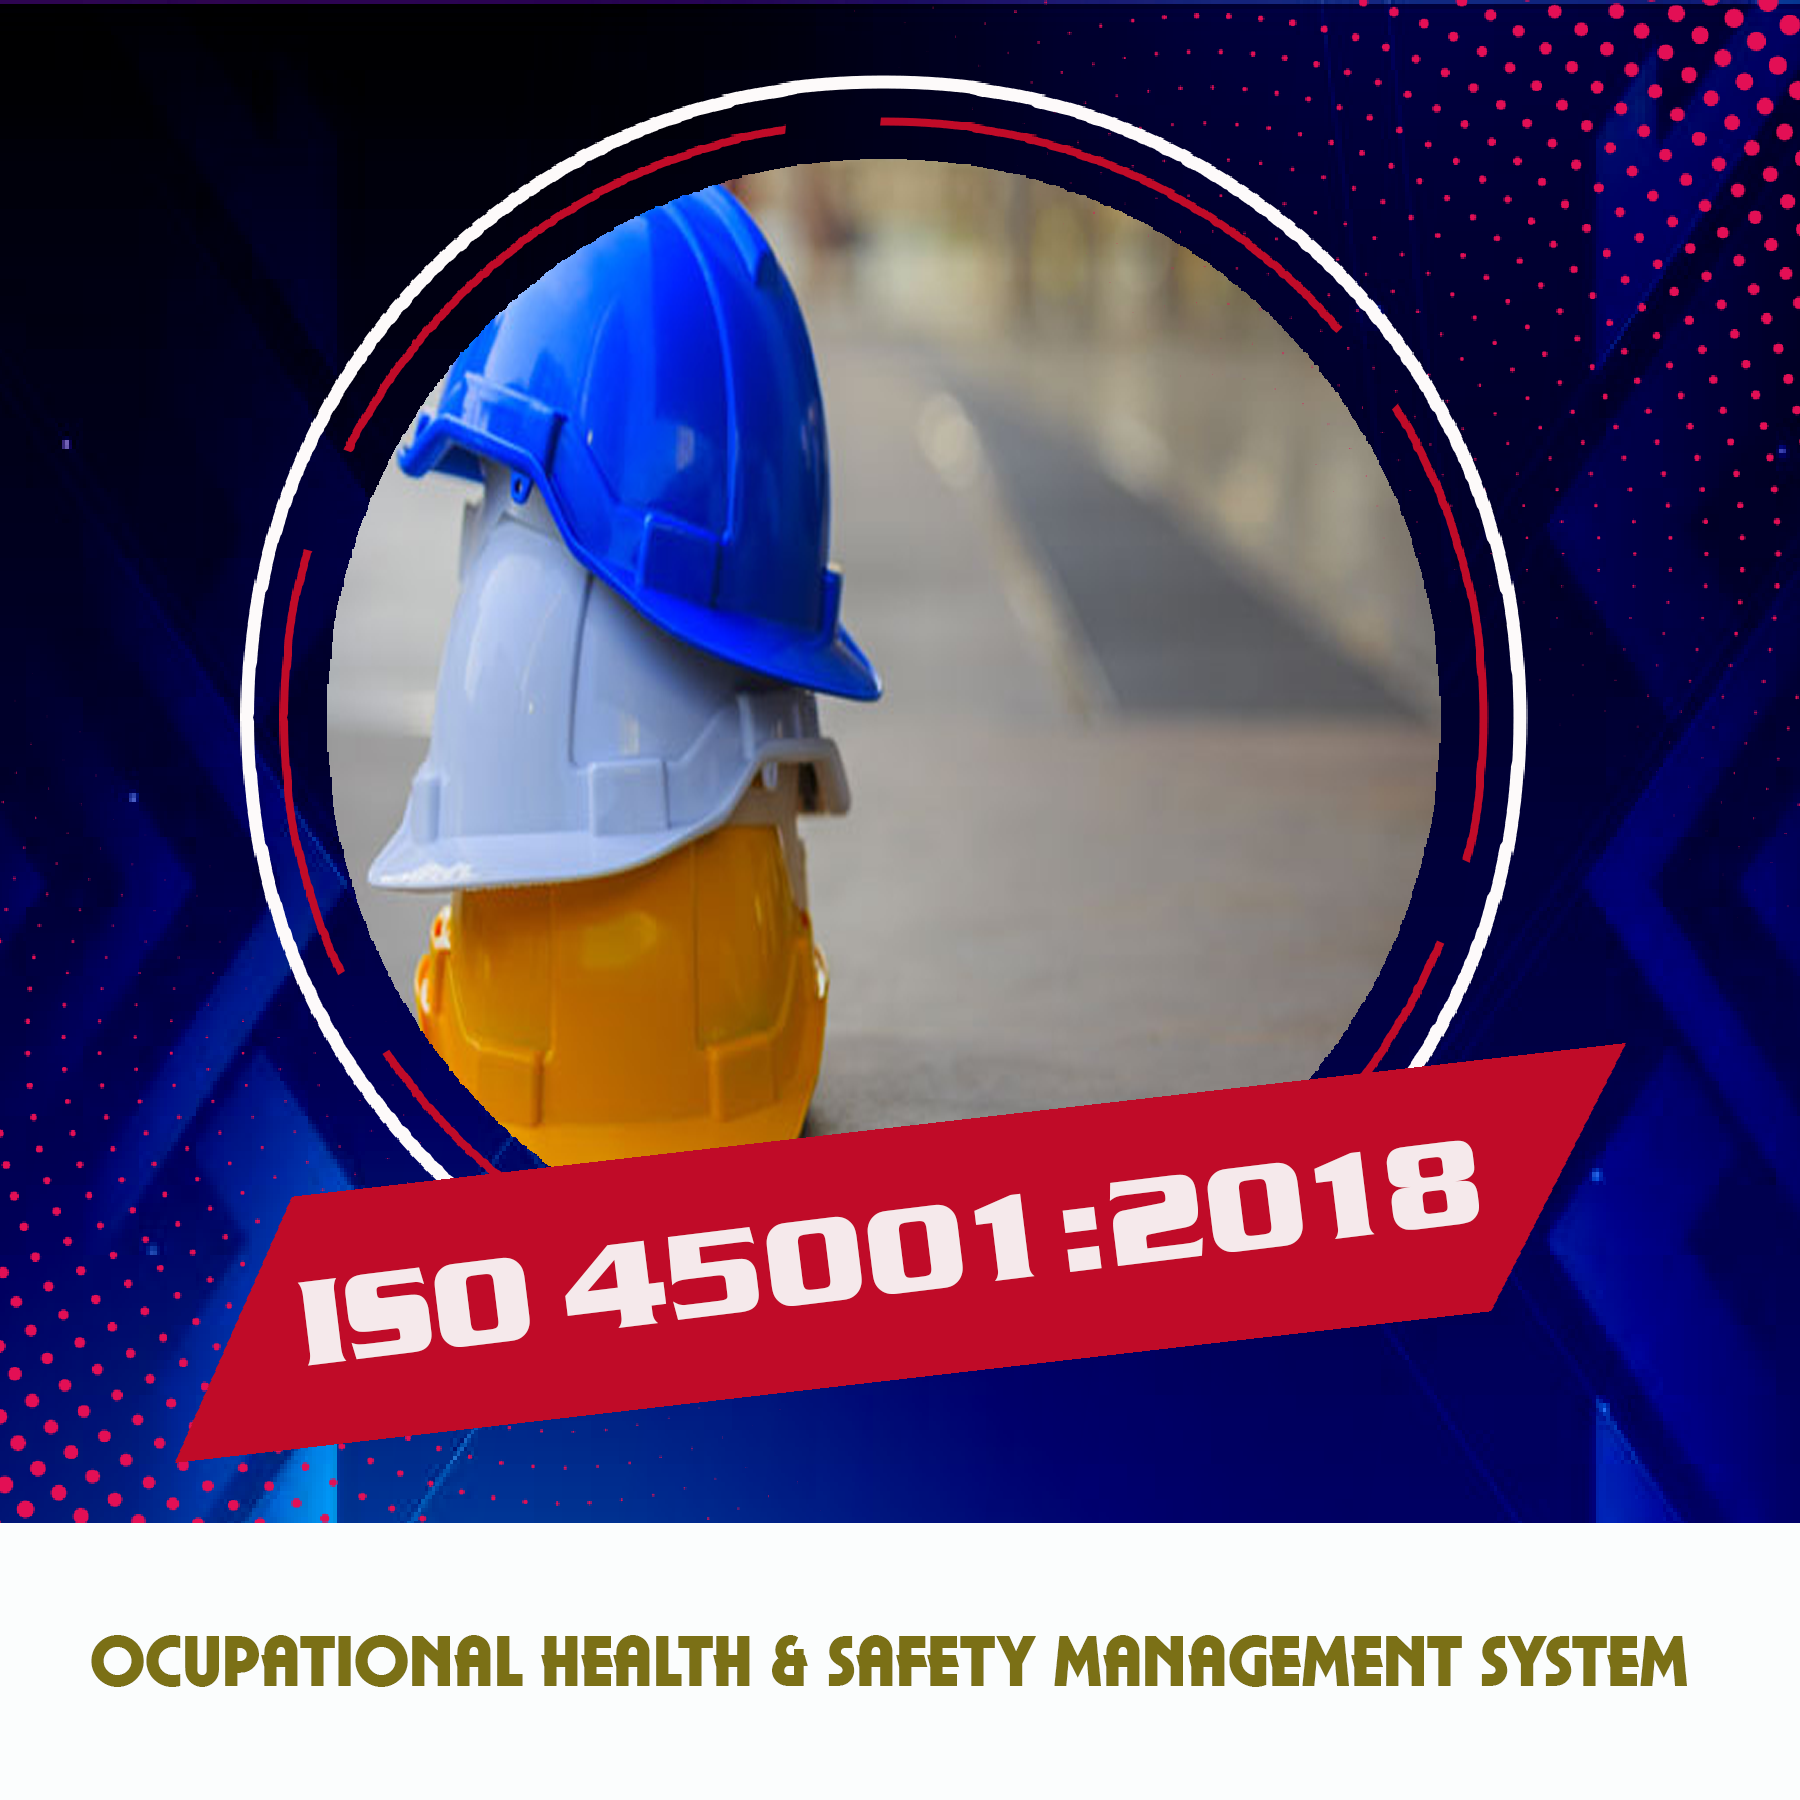 OHSMS - Occupational Health and Safety Management System Main Benifits of Organization